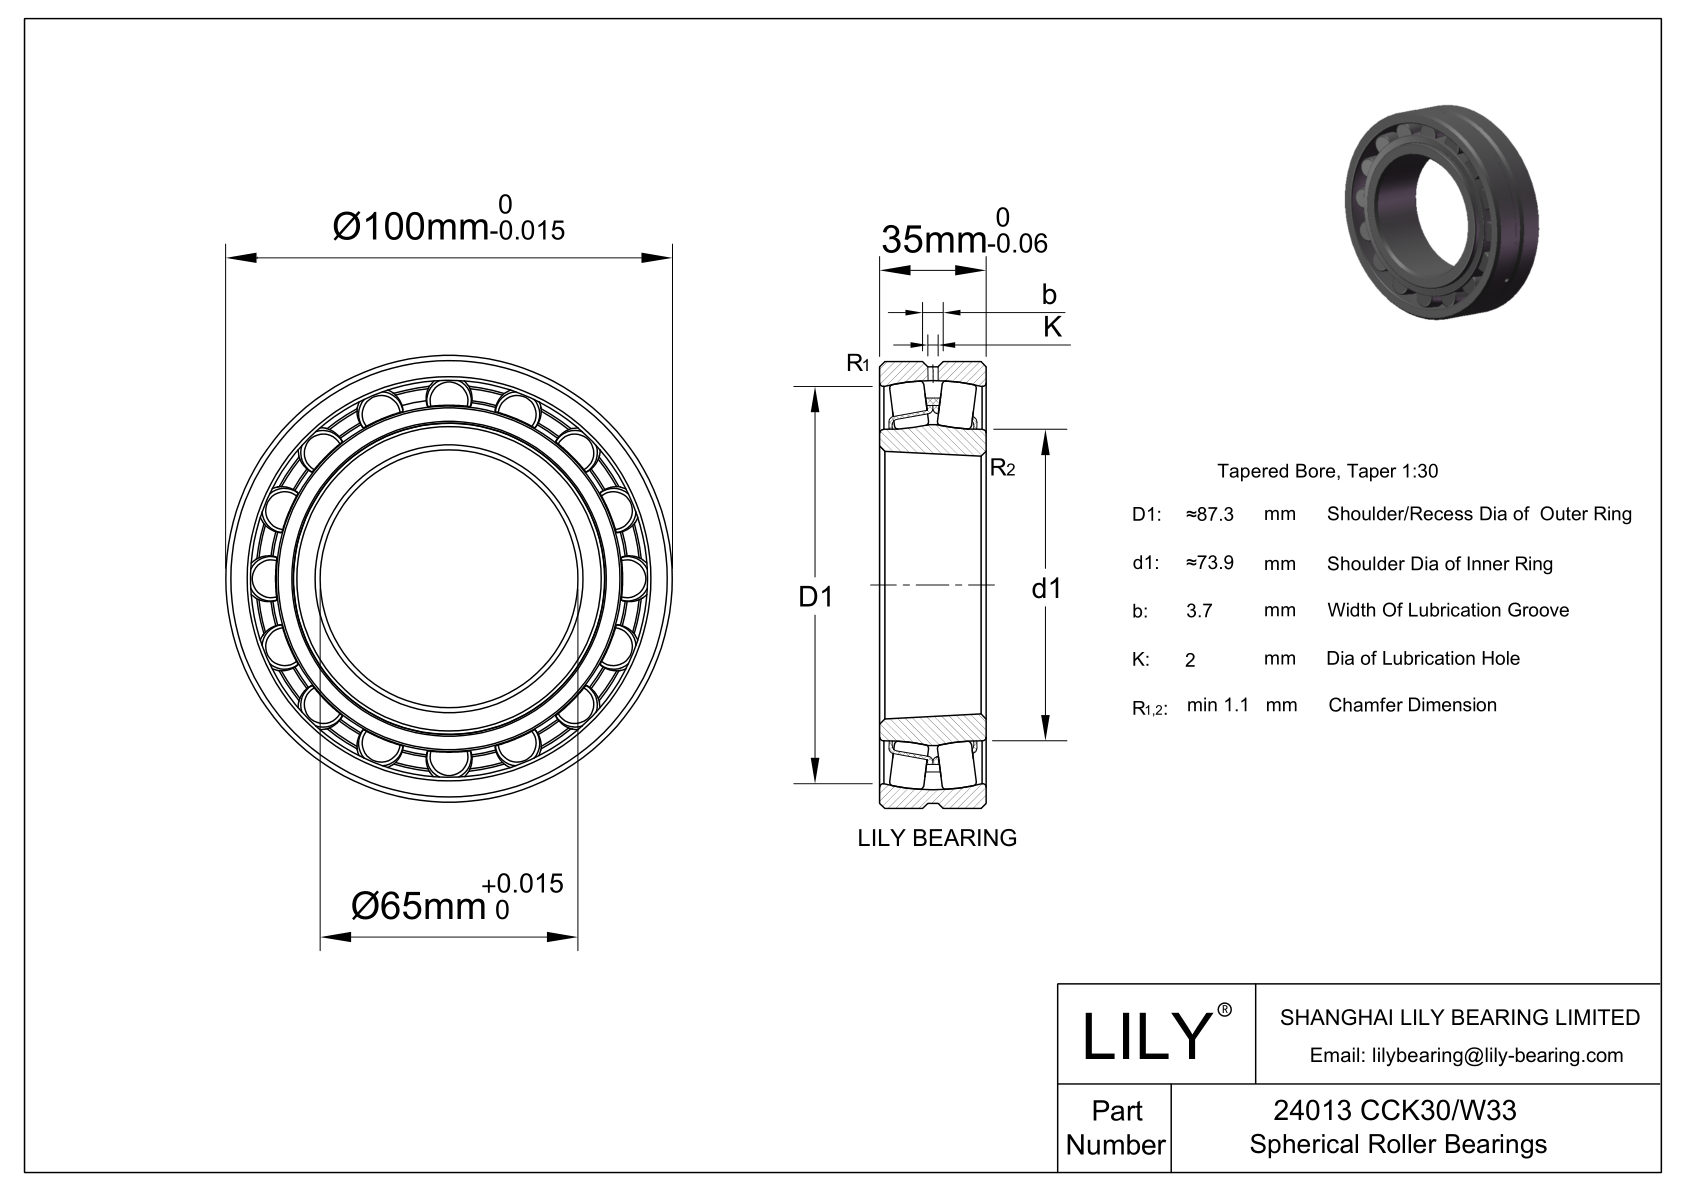 24013 CCK30/W33 Double Row Spherical Roller Bearing cad drawing